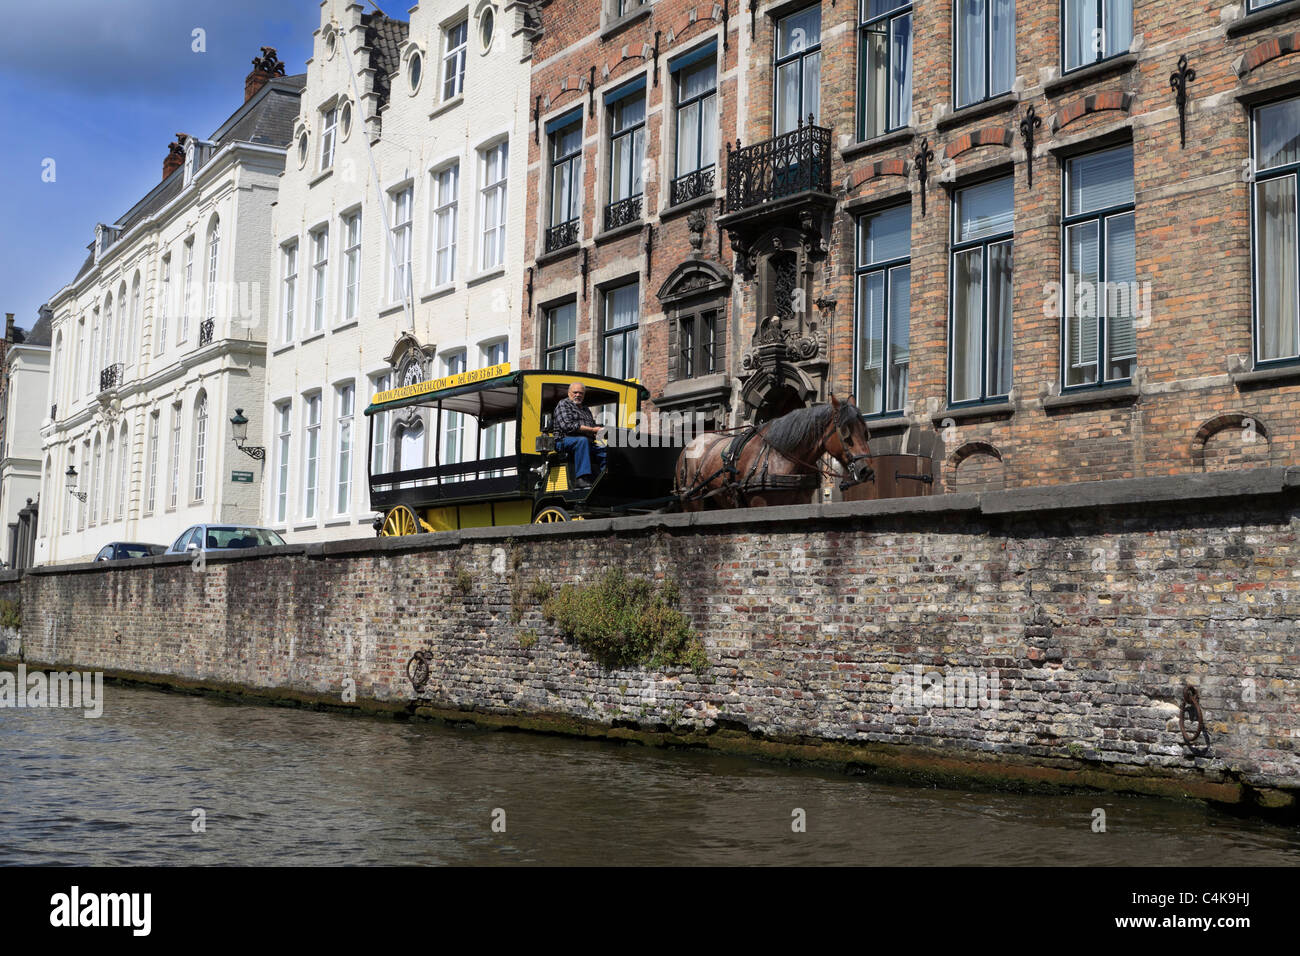 Spieglerei canal, Bruges, Belgium. A horse drawn tram passes the canalside houses. Stock Photo